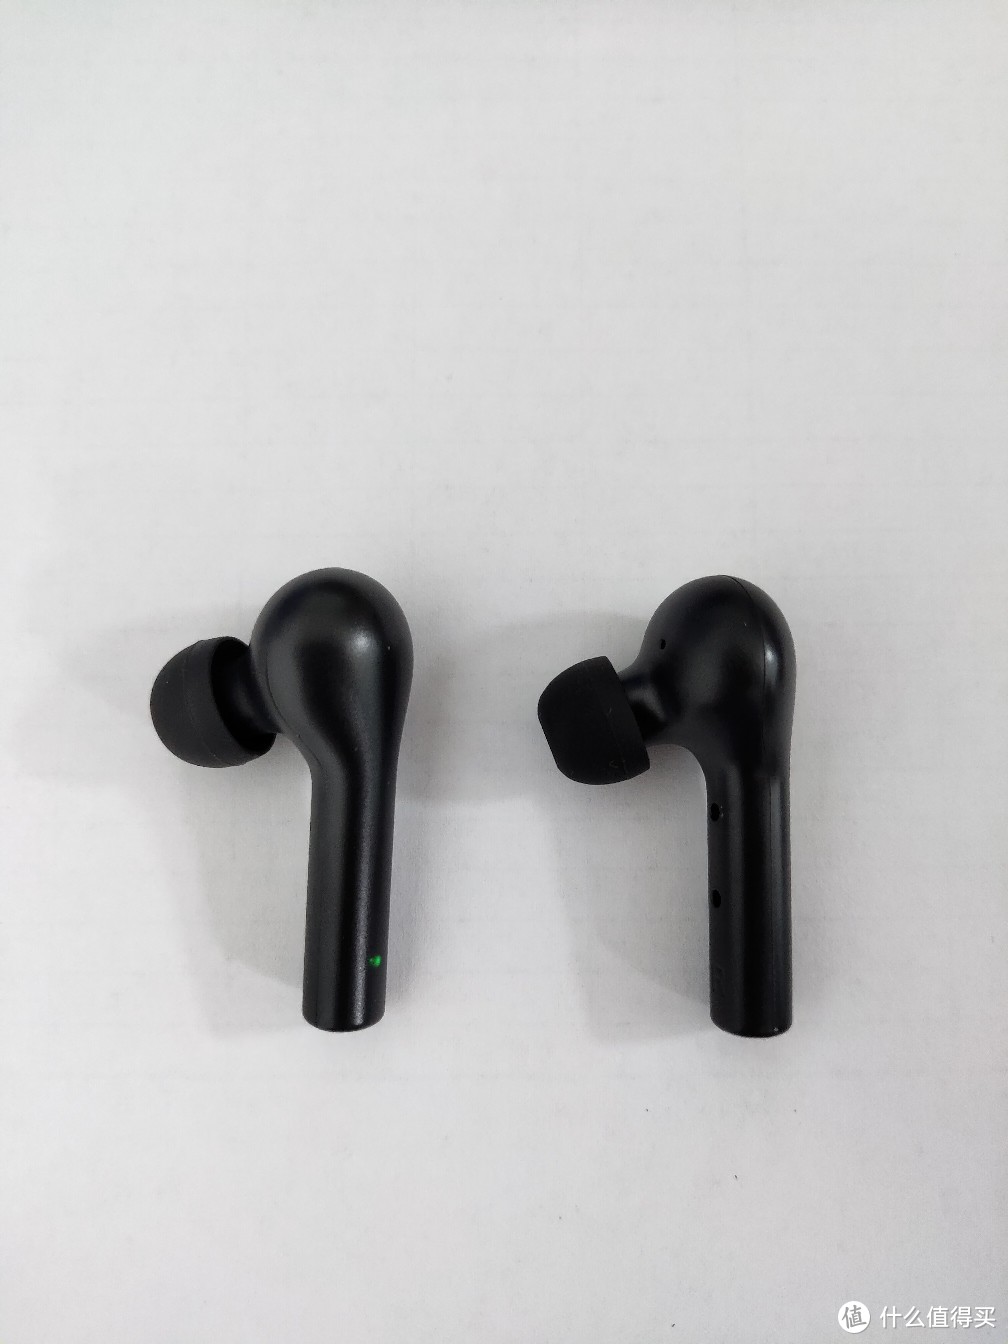   QCY T5 TWS SMART EARBUDS